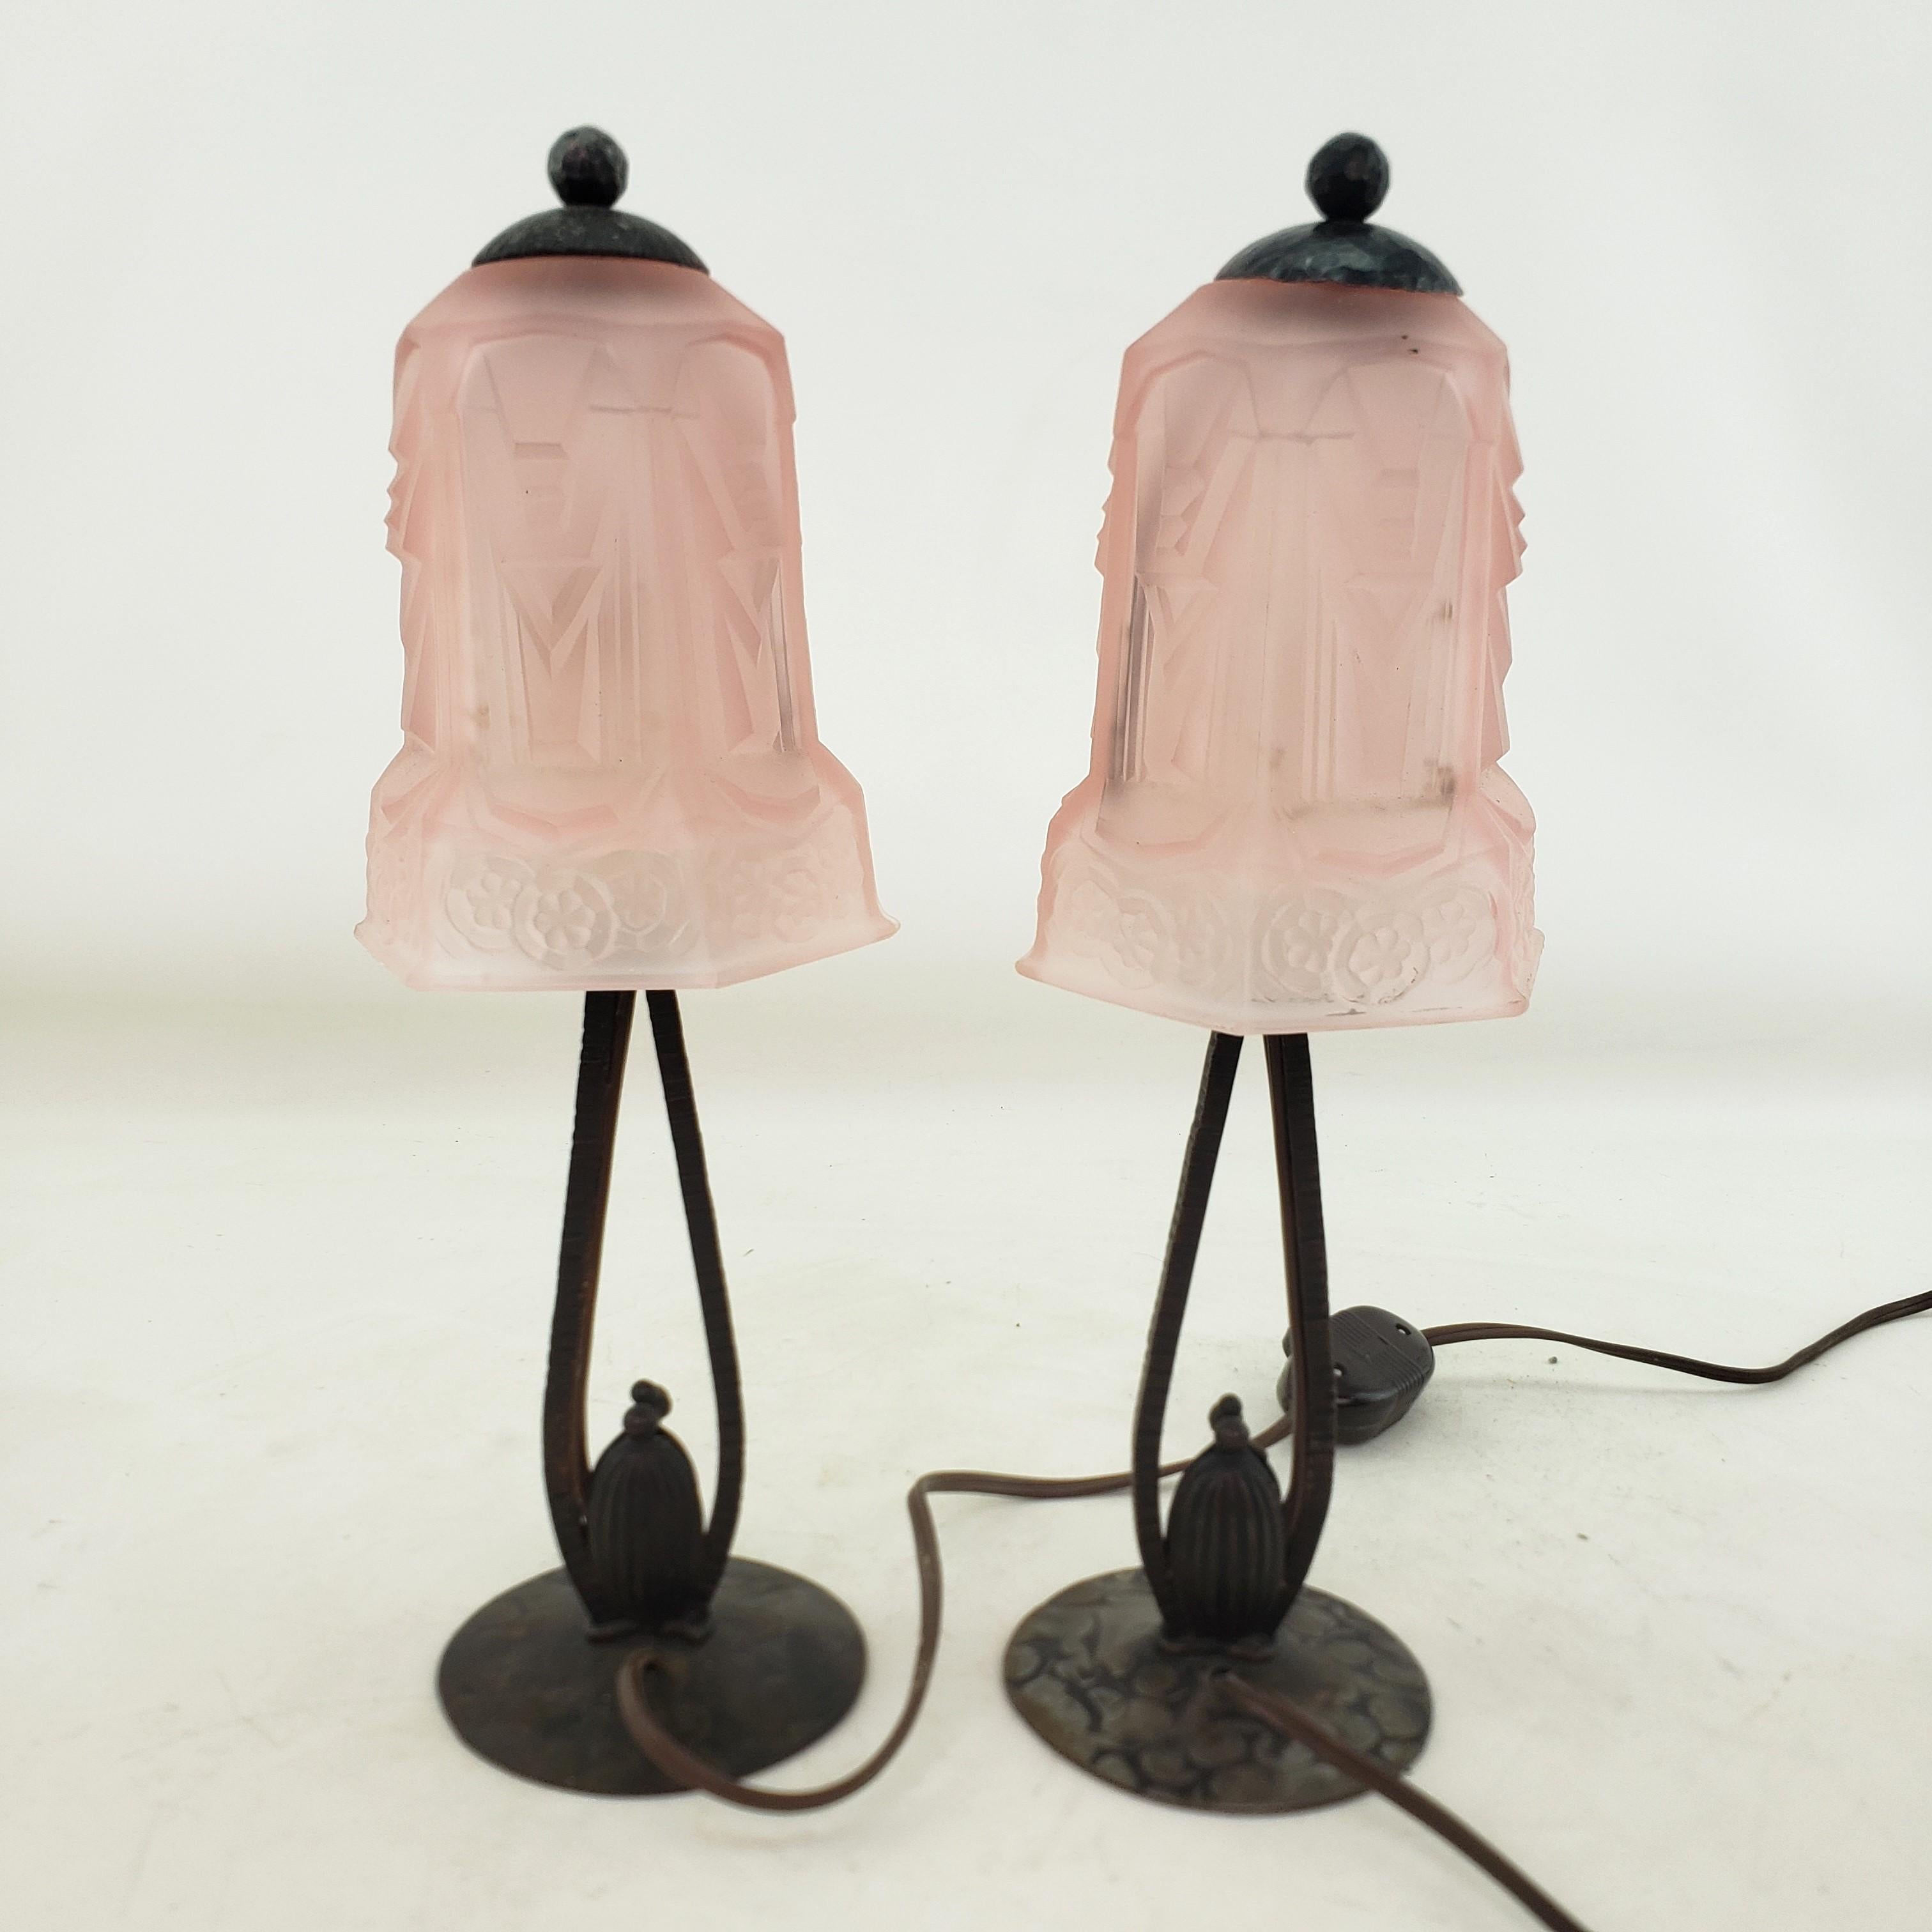 Pair of Antique Art Deco Bourdoir or Table Lamps with Frosted Pink Glass Shades For Sale 4